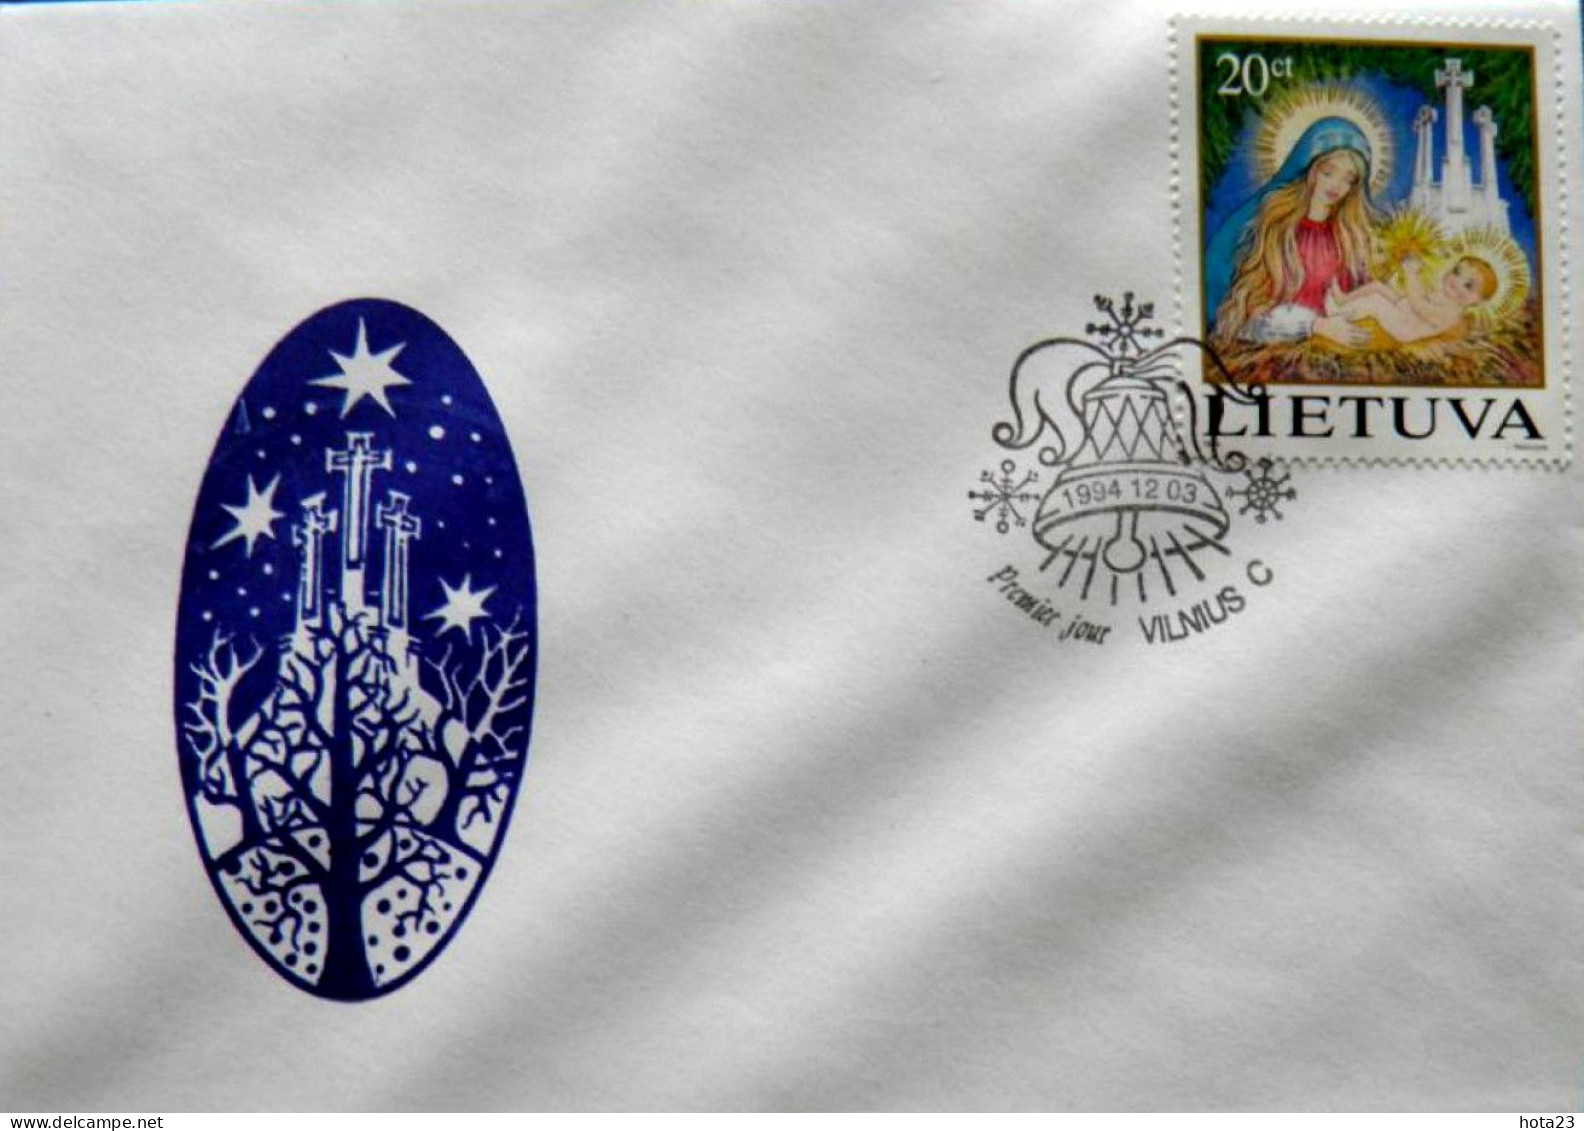 (!) LITHUANIA 1994 THE BIRTH OF JESUS ,Christmas Noel Bell - Mi.572 FDC - Lithuania